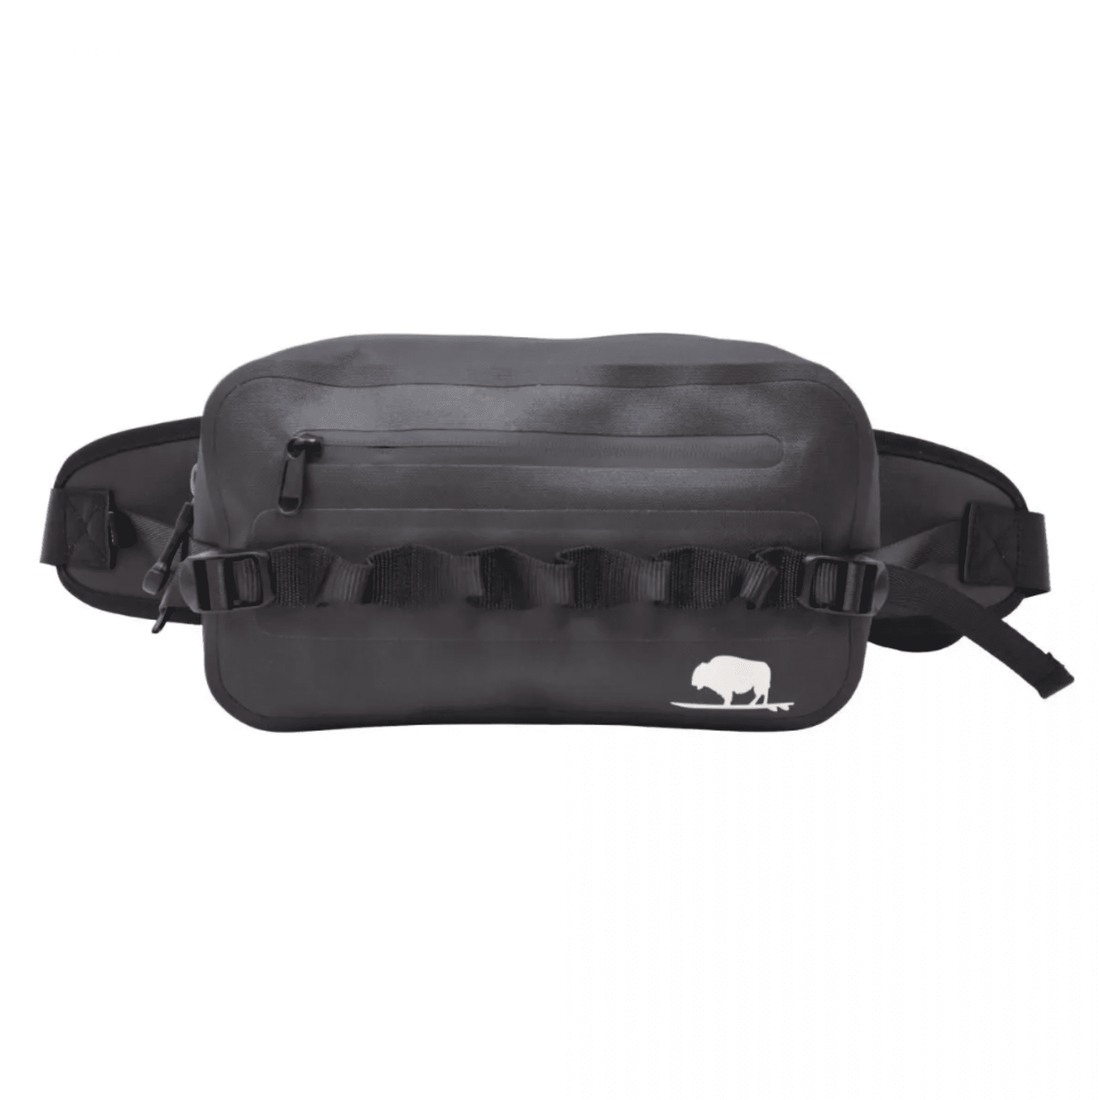 Atoll Black Atoll Overkill Dry Bag Waist Pouch Fanny Pack